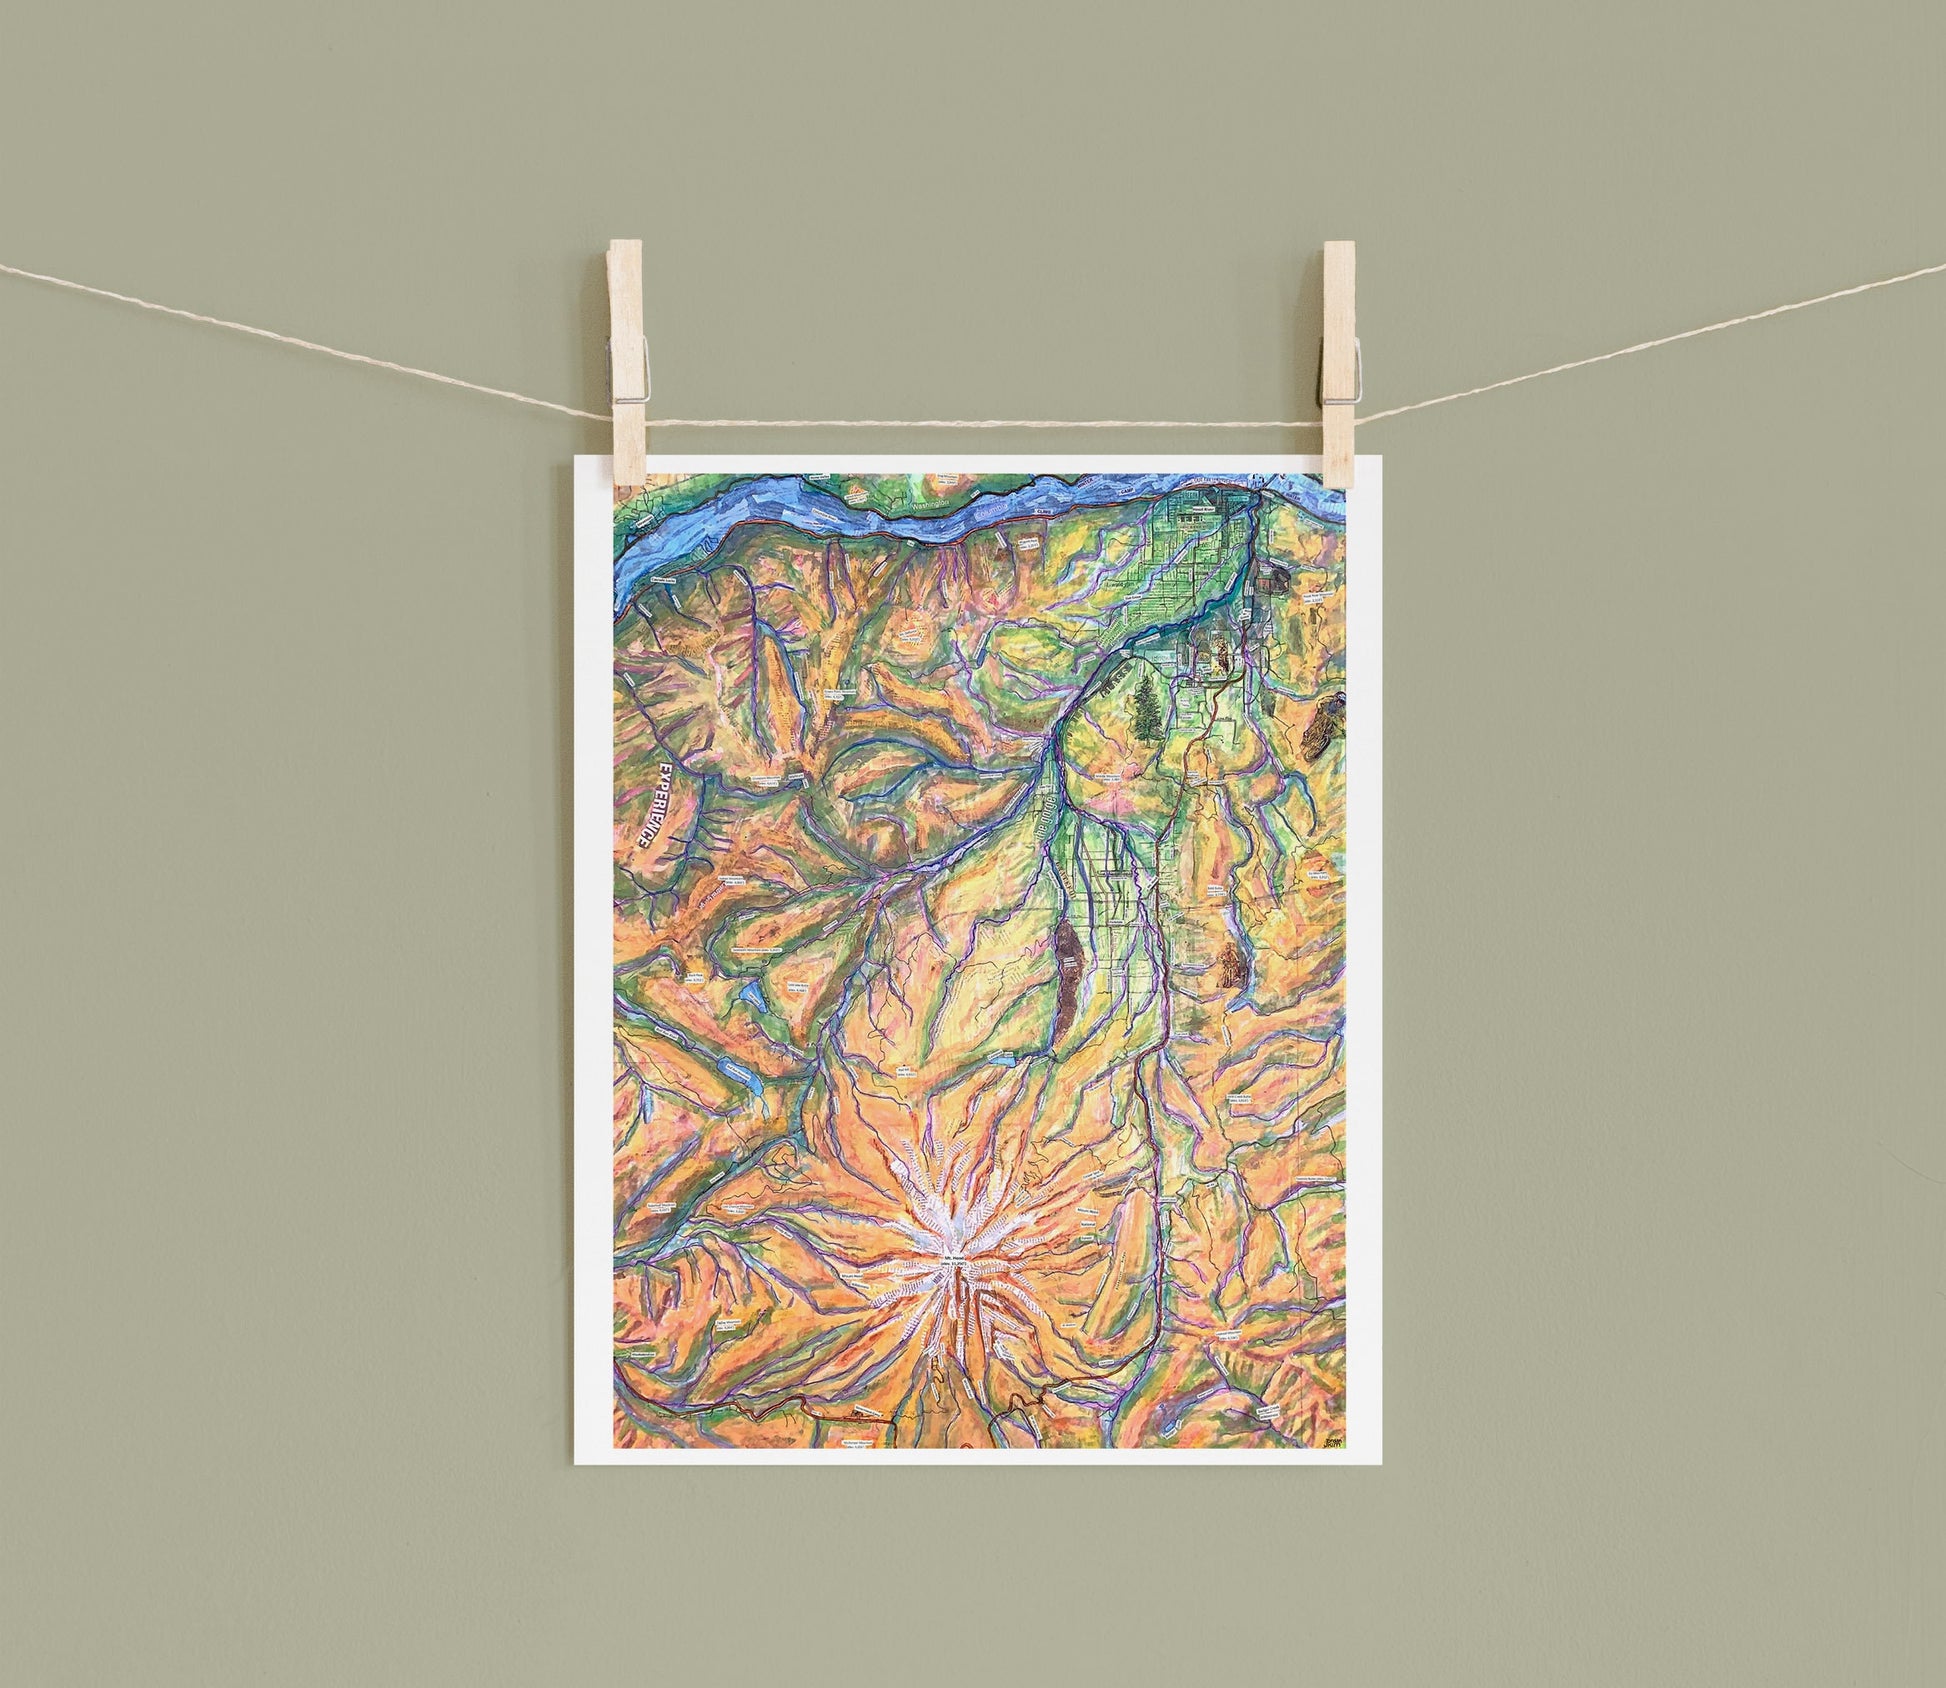 8"x10" Art Print of Hood River Valley Topo Map Collage - Order a Custom Design for Your Home Town! - Great Custom Gift!